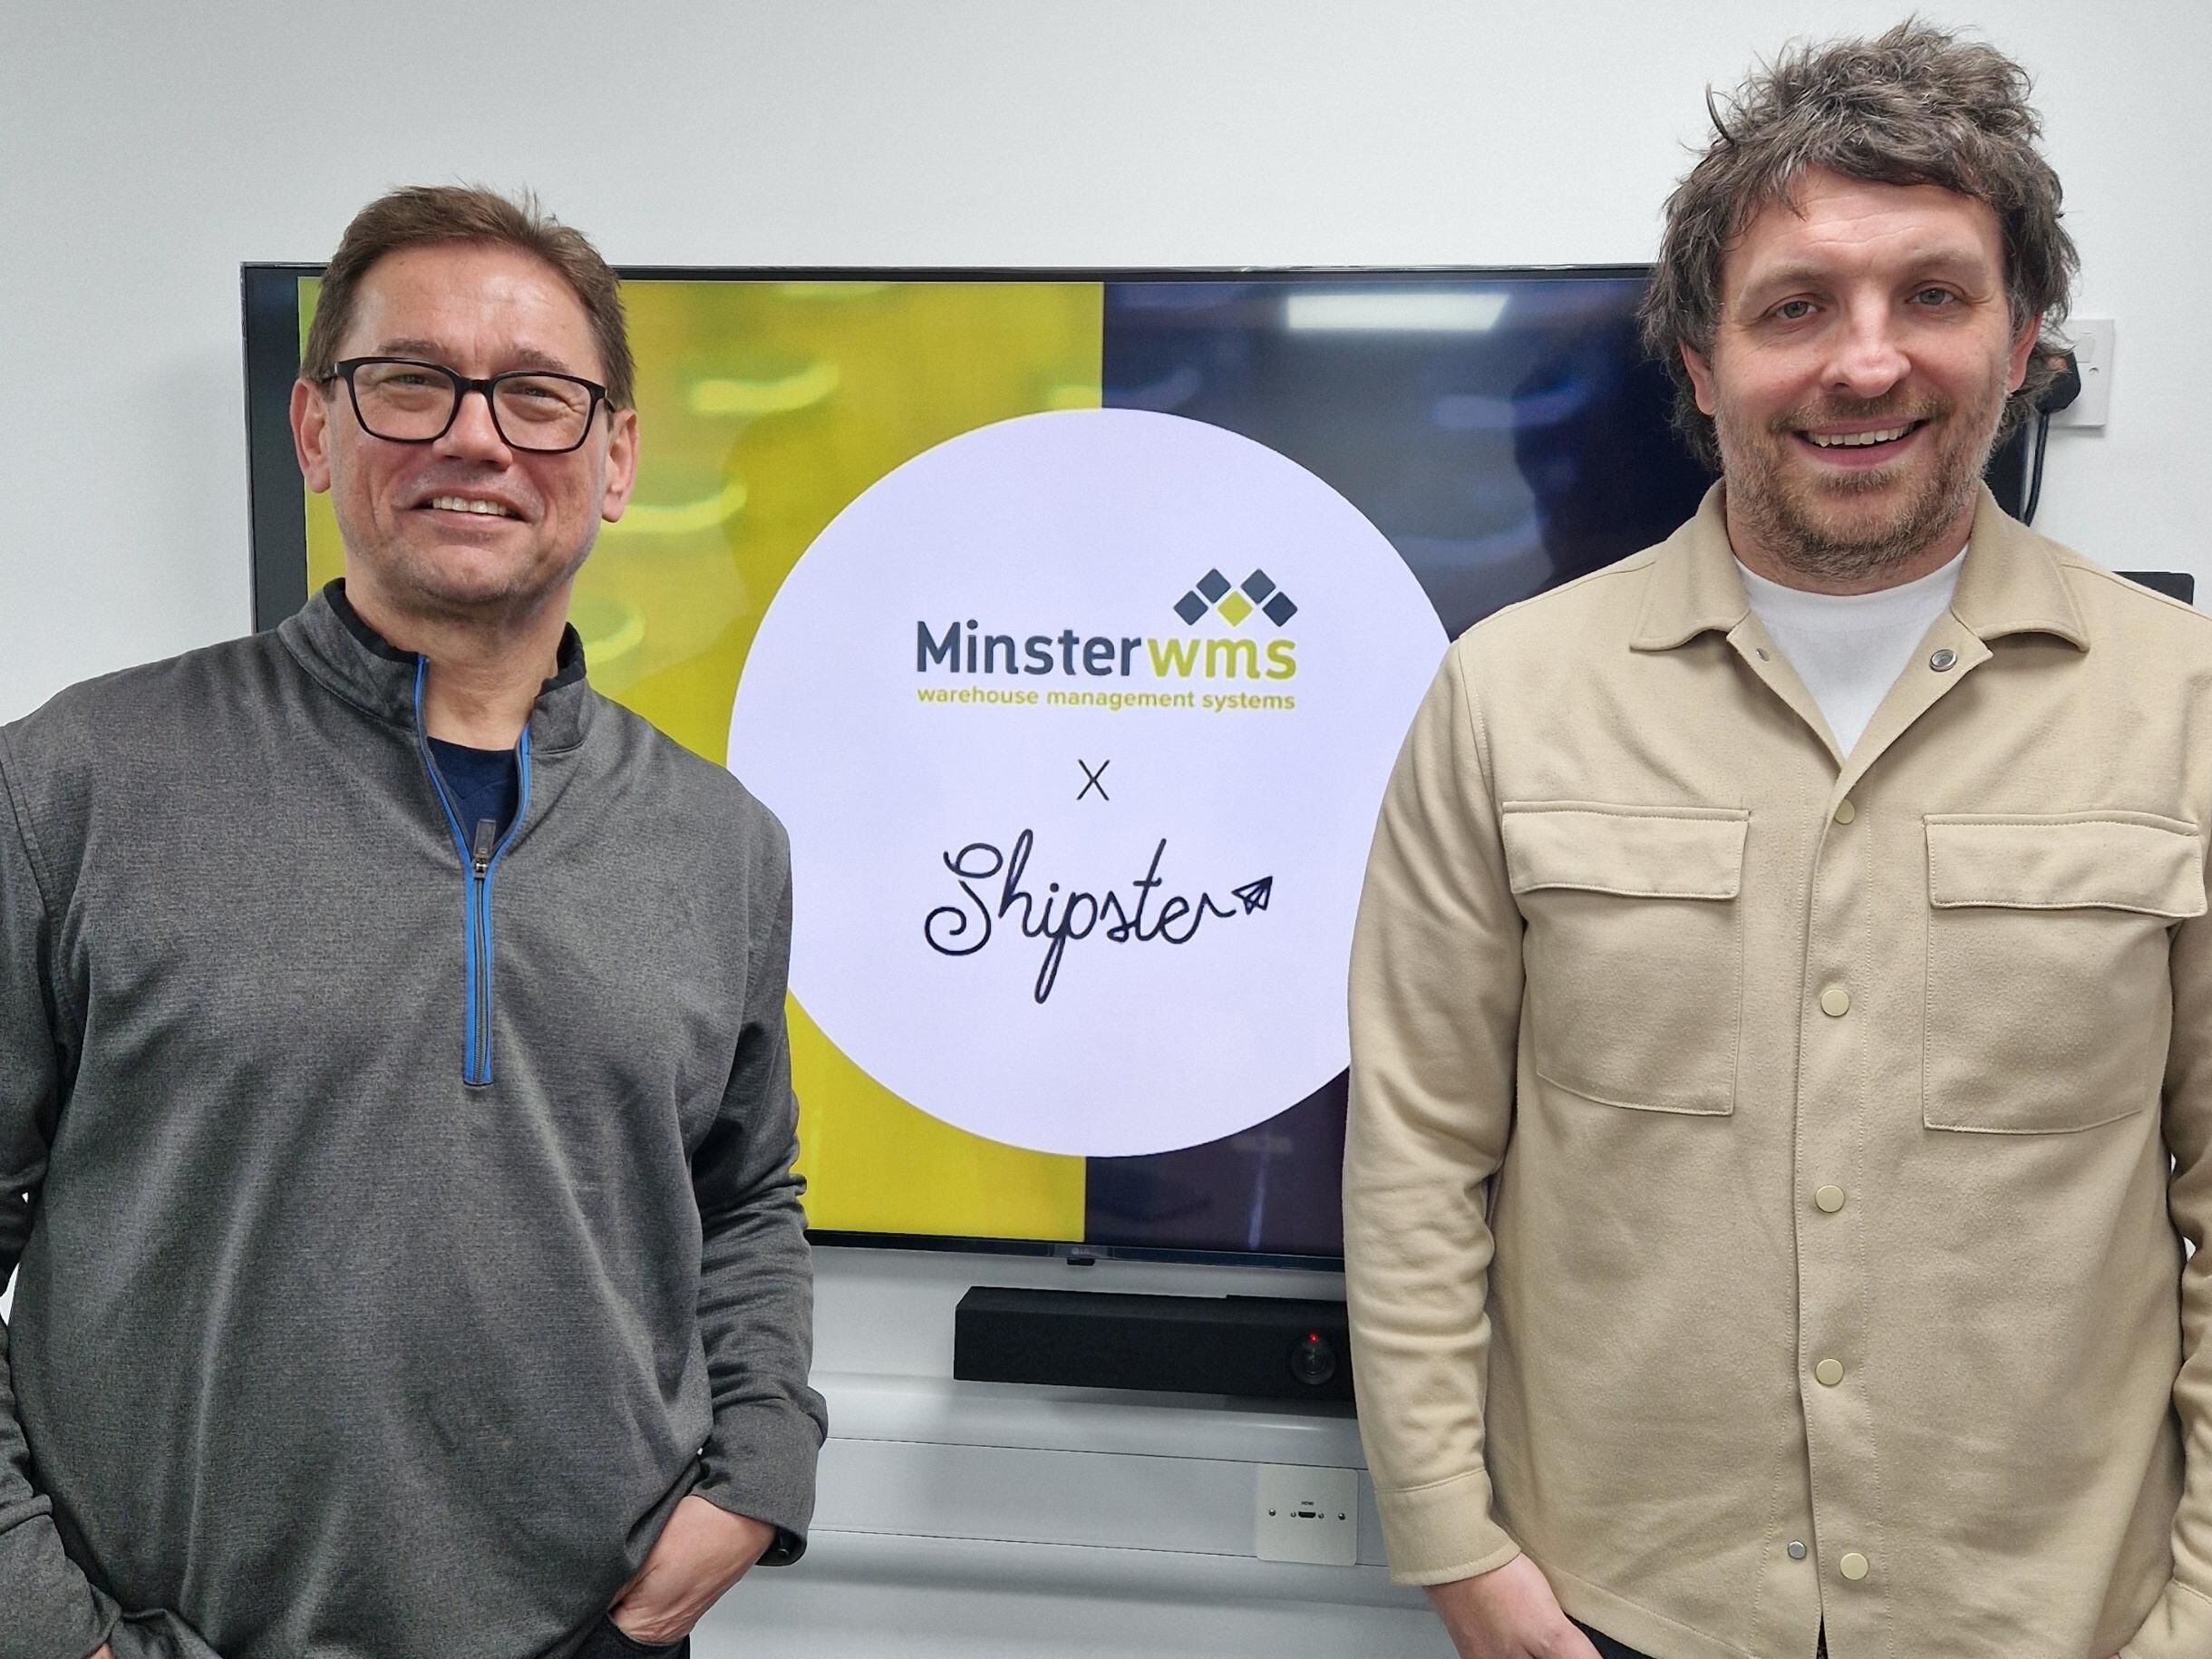 Shipster and Minster WMS partnership to deliver robust end-to-end logistics solution